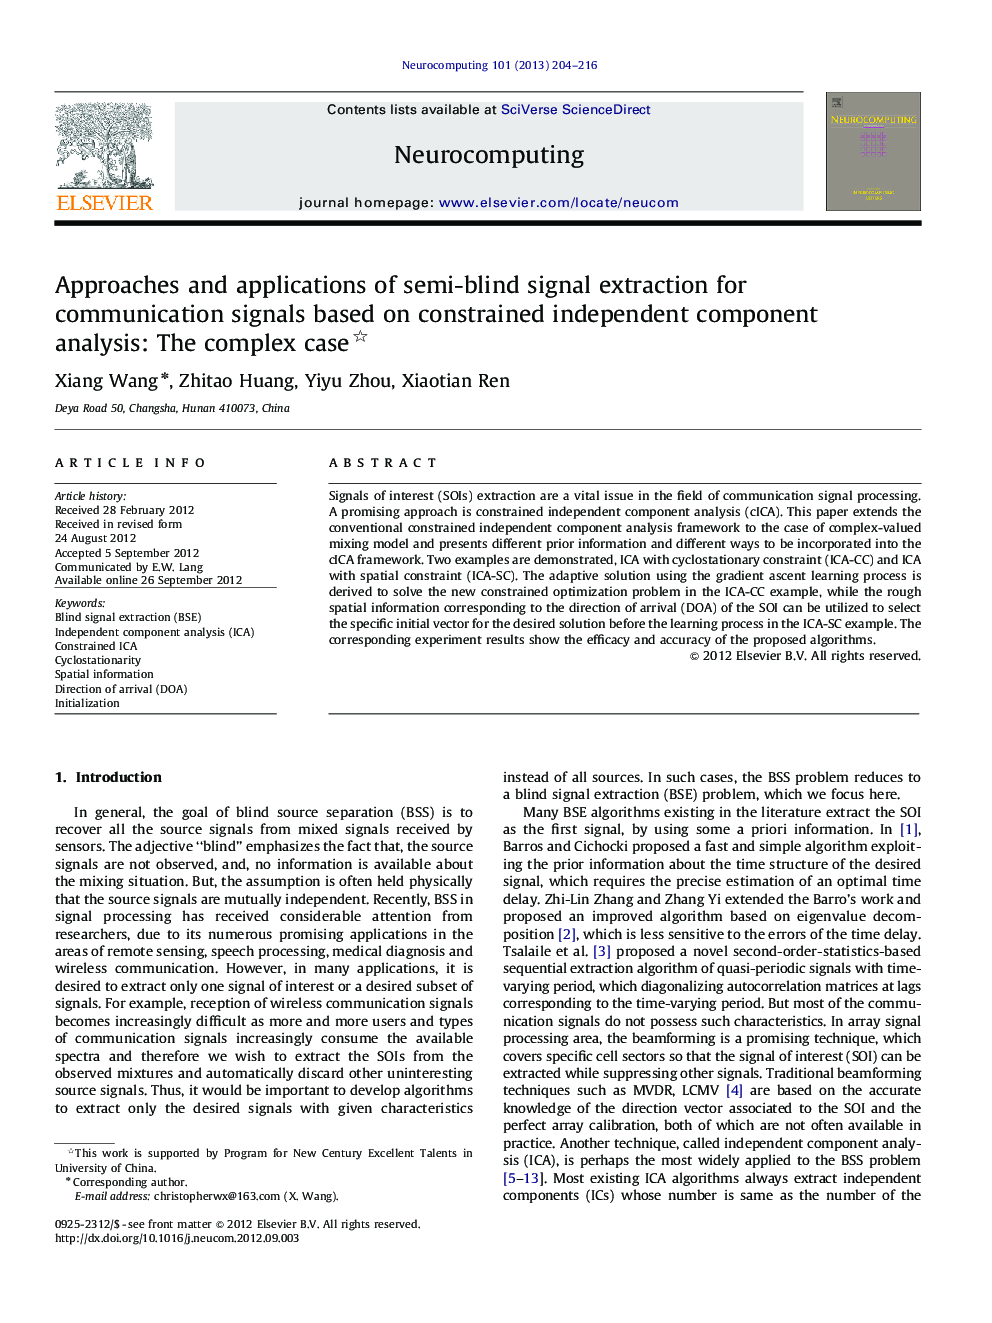 Approaches and applications of semi-blind signal extraction for communication signals based on constrained independent component analysis: The complex case 